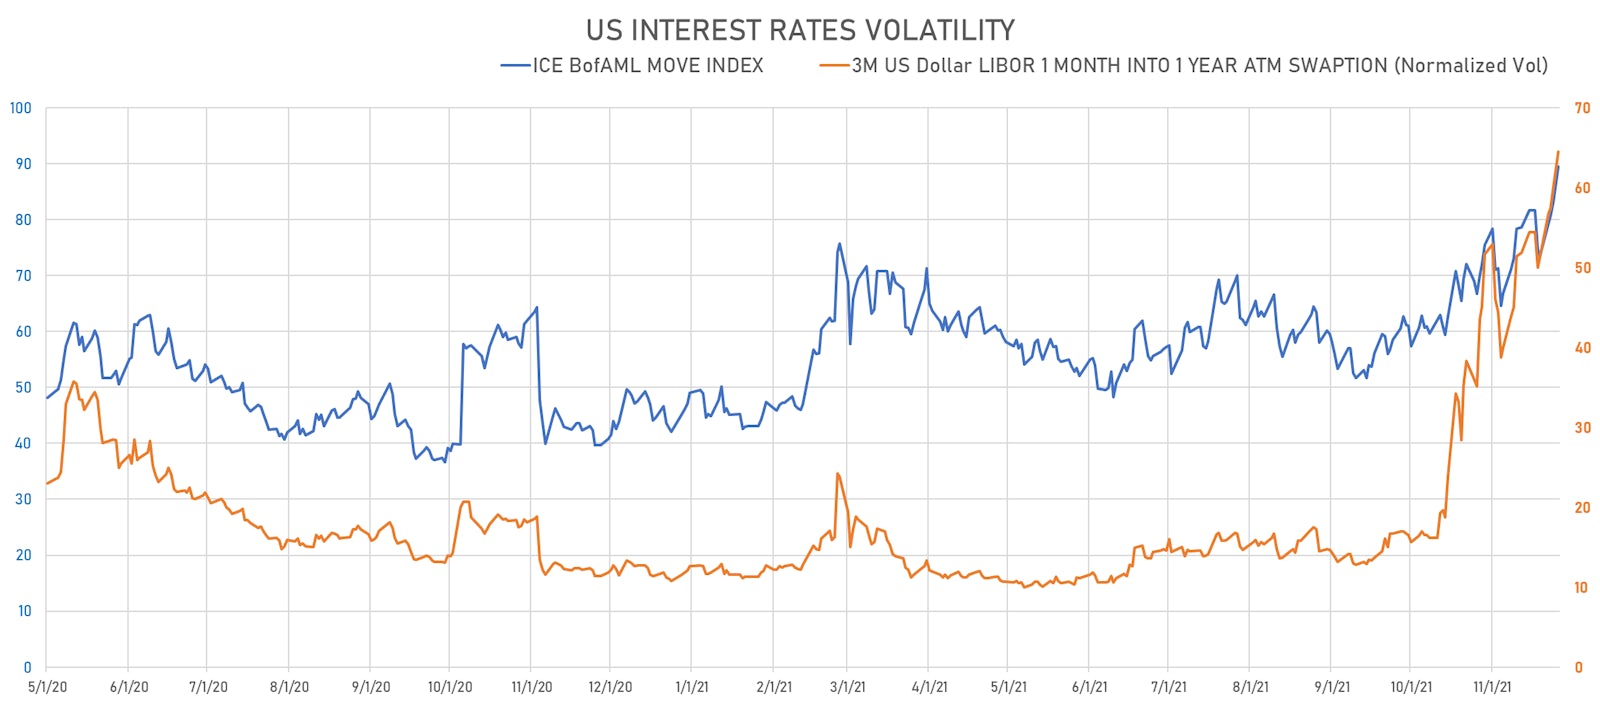 US Rates Volatility At Highest Level Since March 2020 | Sources: ϕpost, Refinitiv data